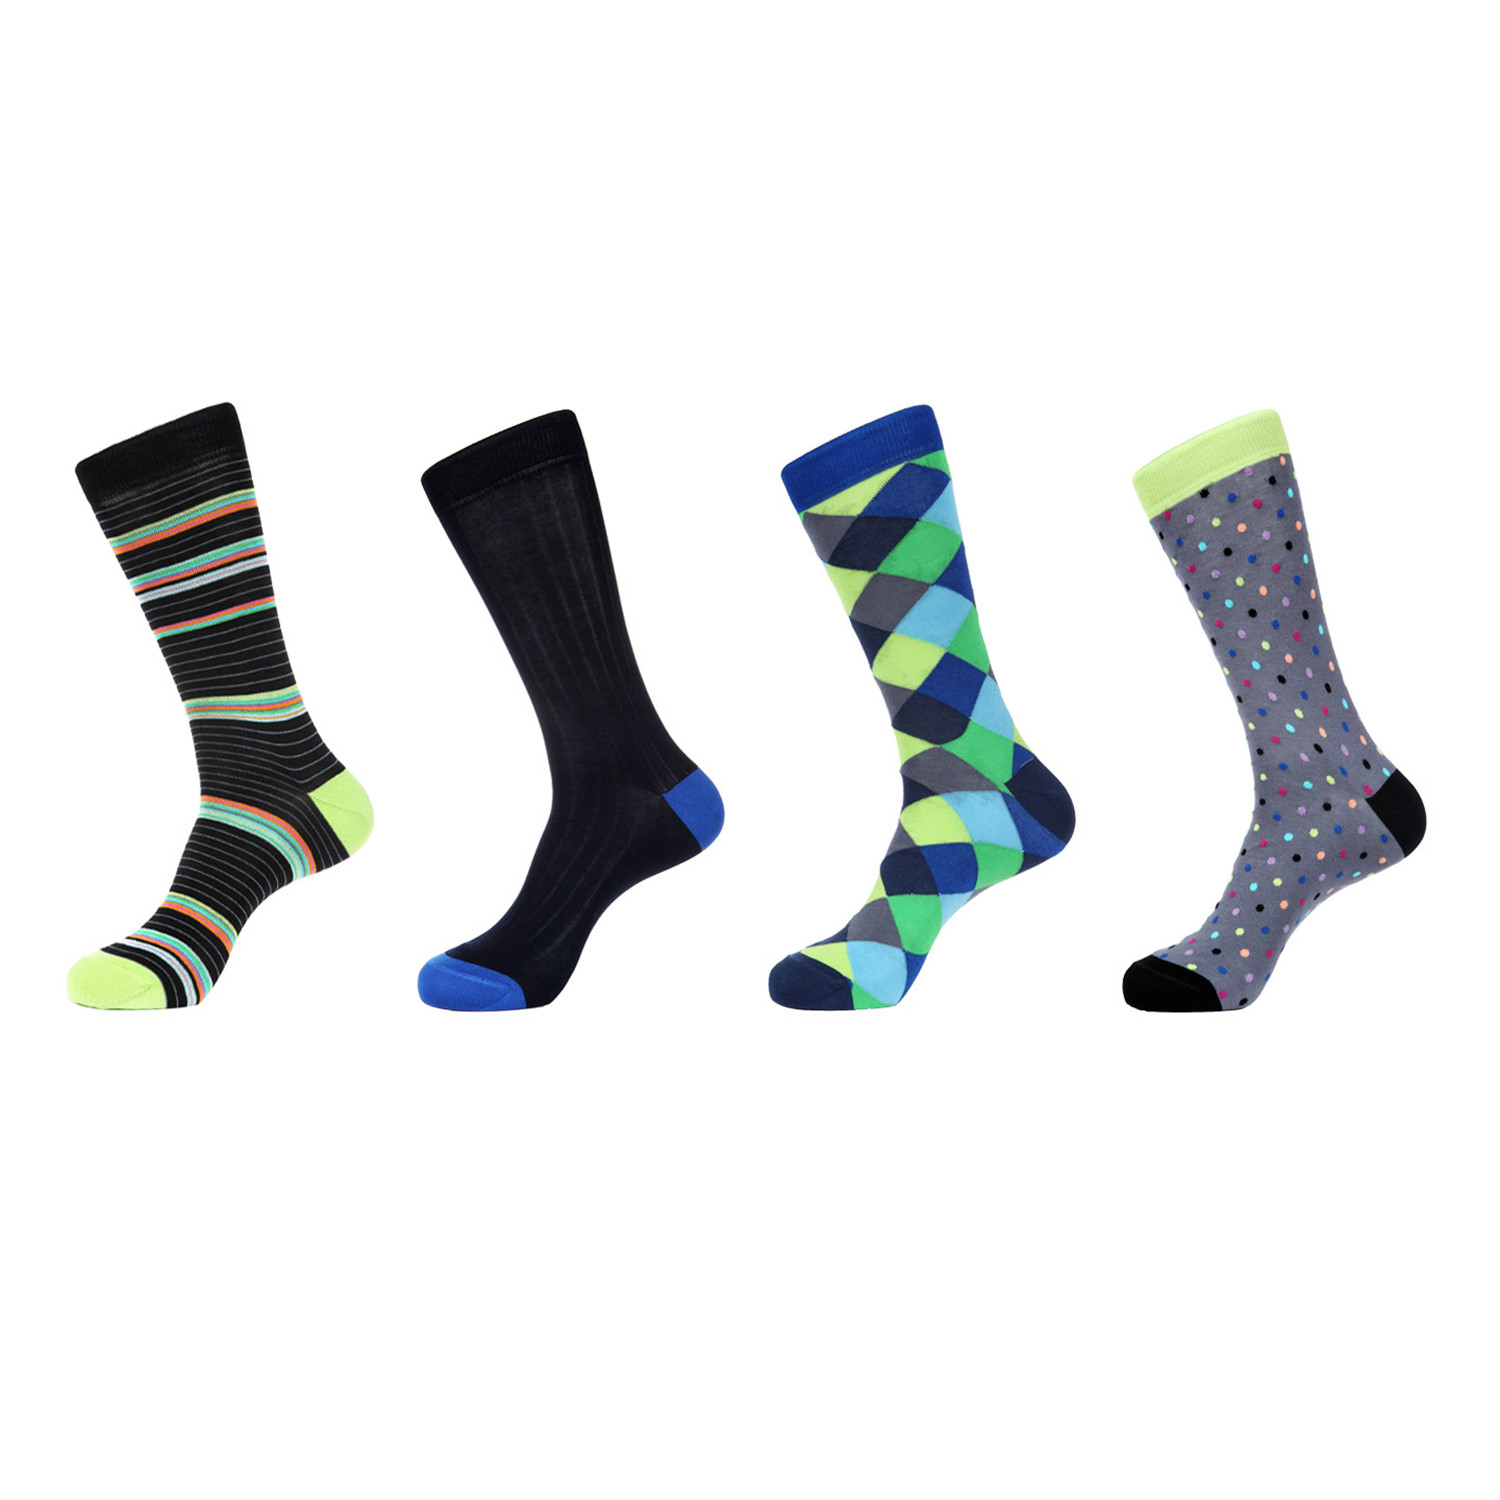 Flossie Combed Cotton Socks // 4 Pack - Jared Lang - Touch of Modern